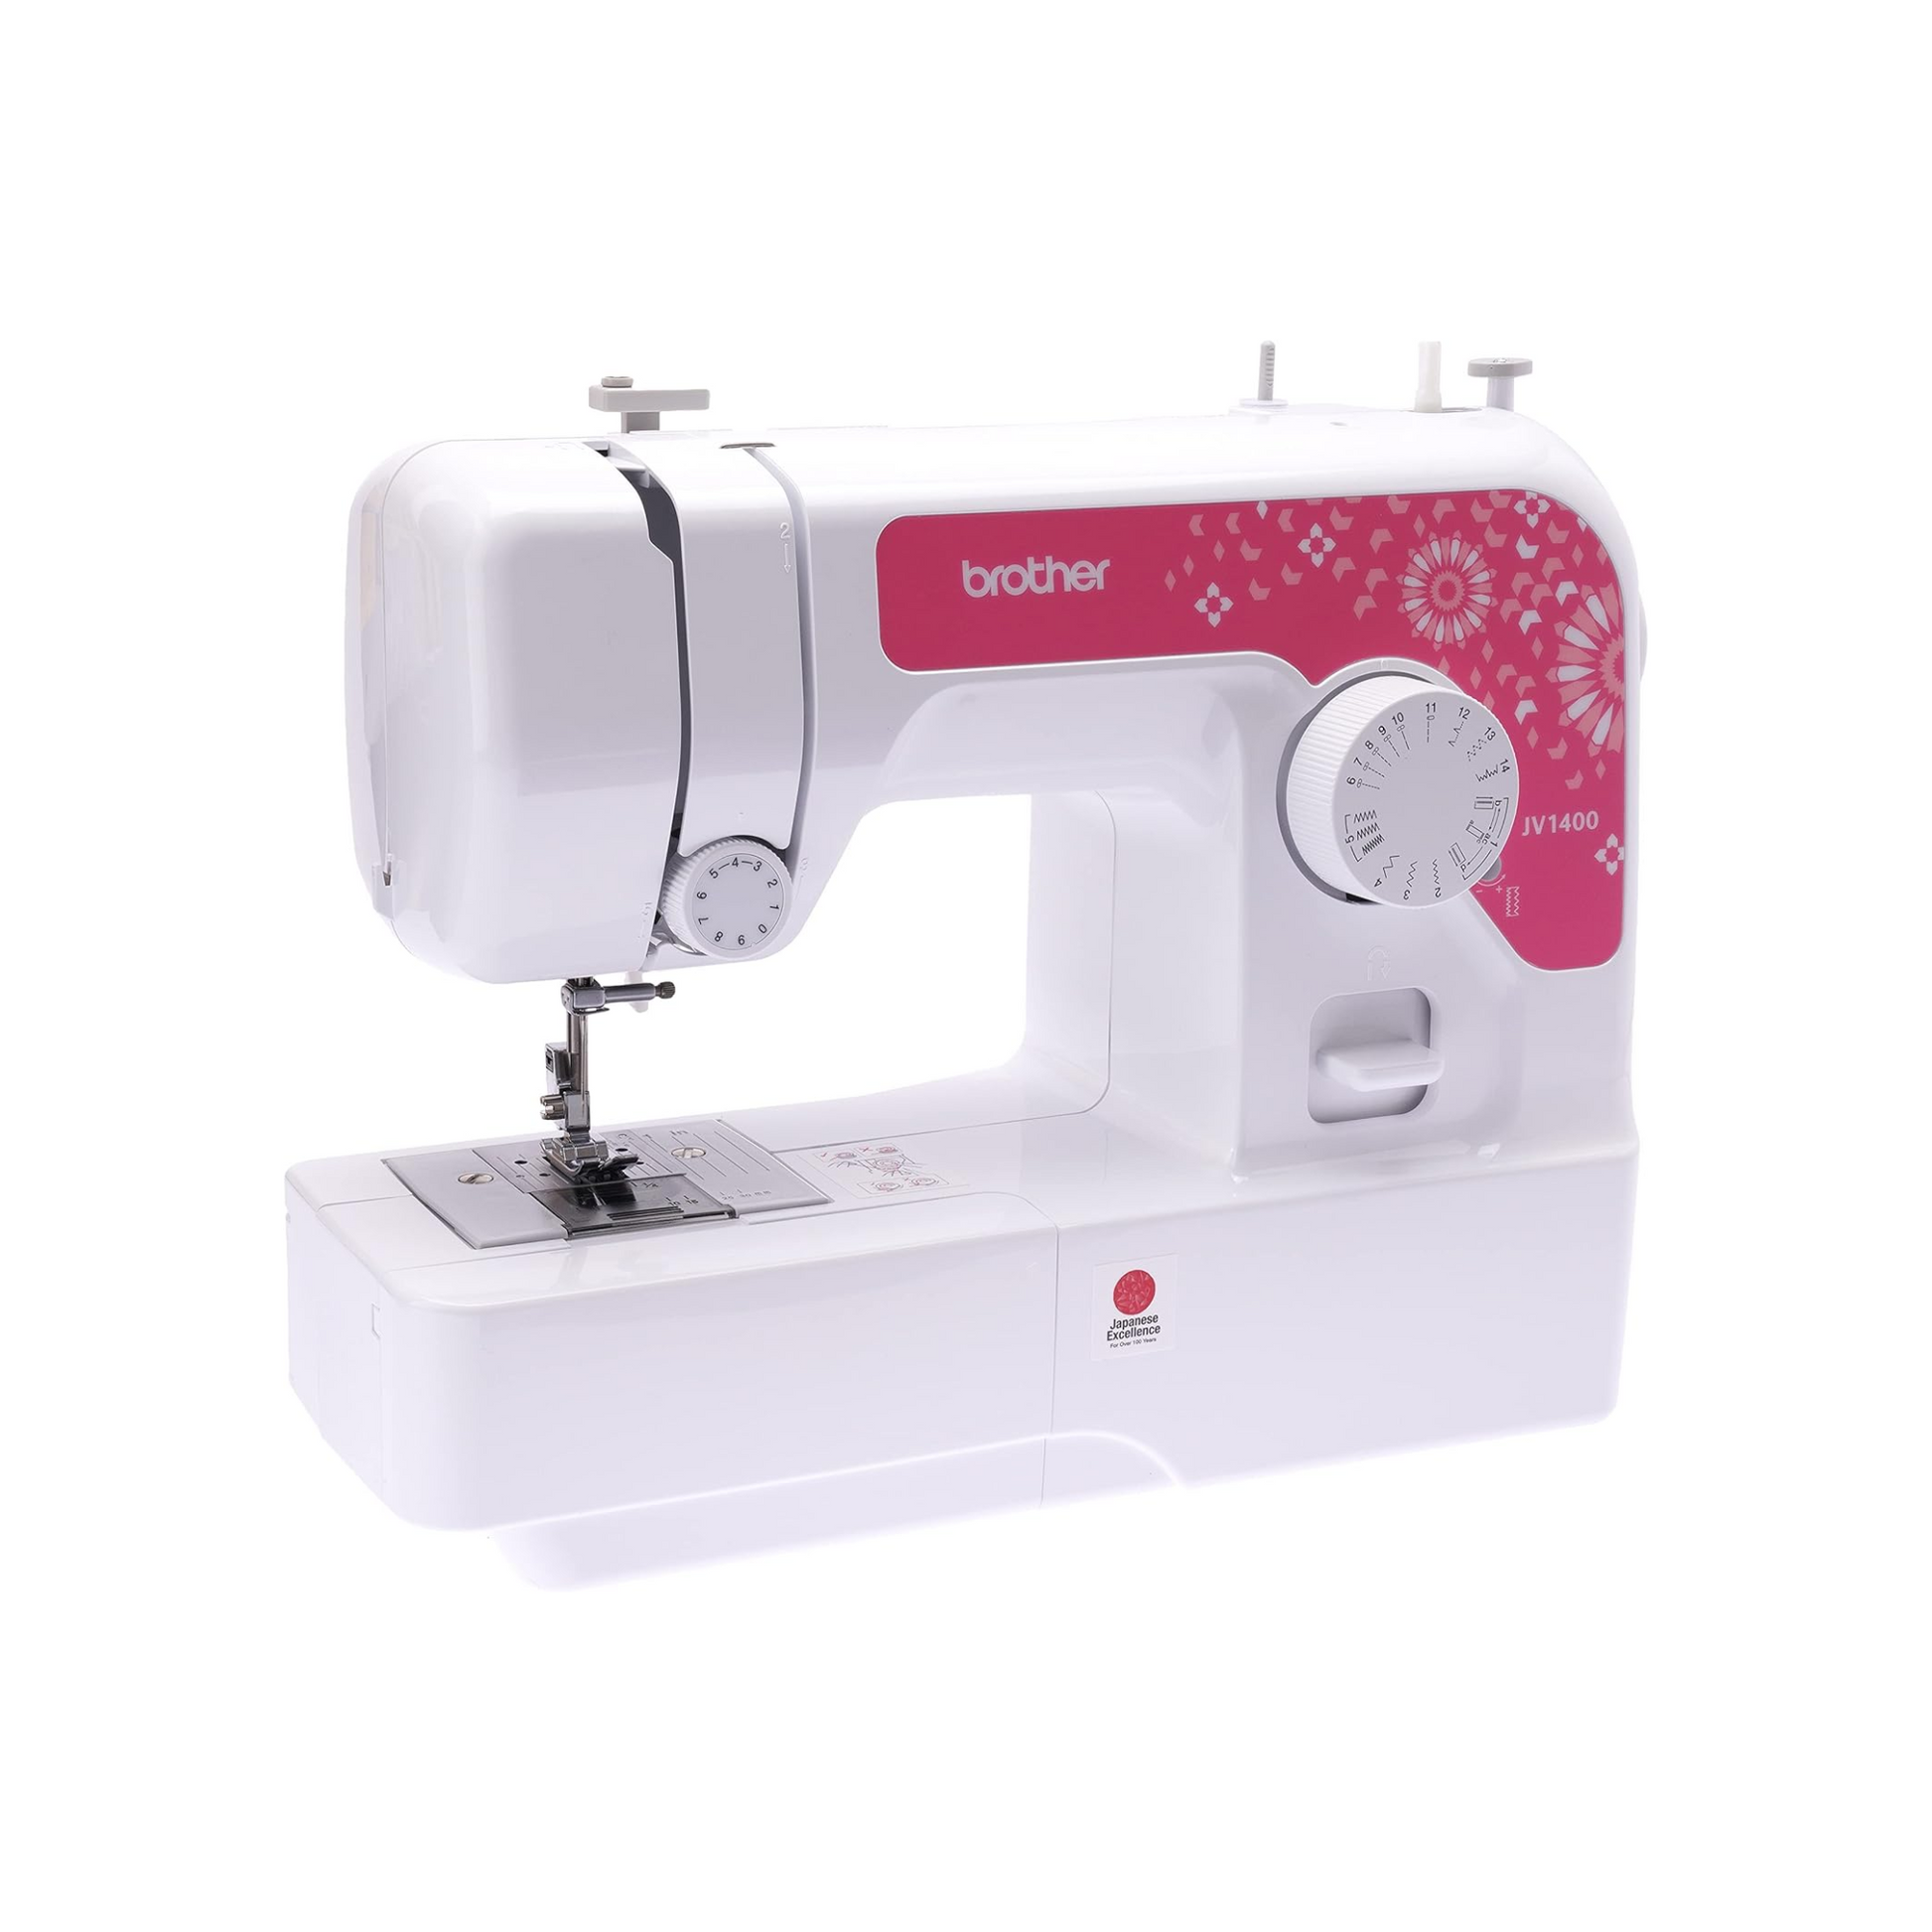 Brother JV1400 - Sewing machine - White - Side view